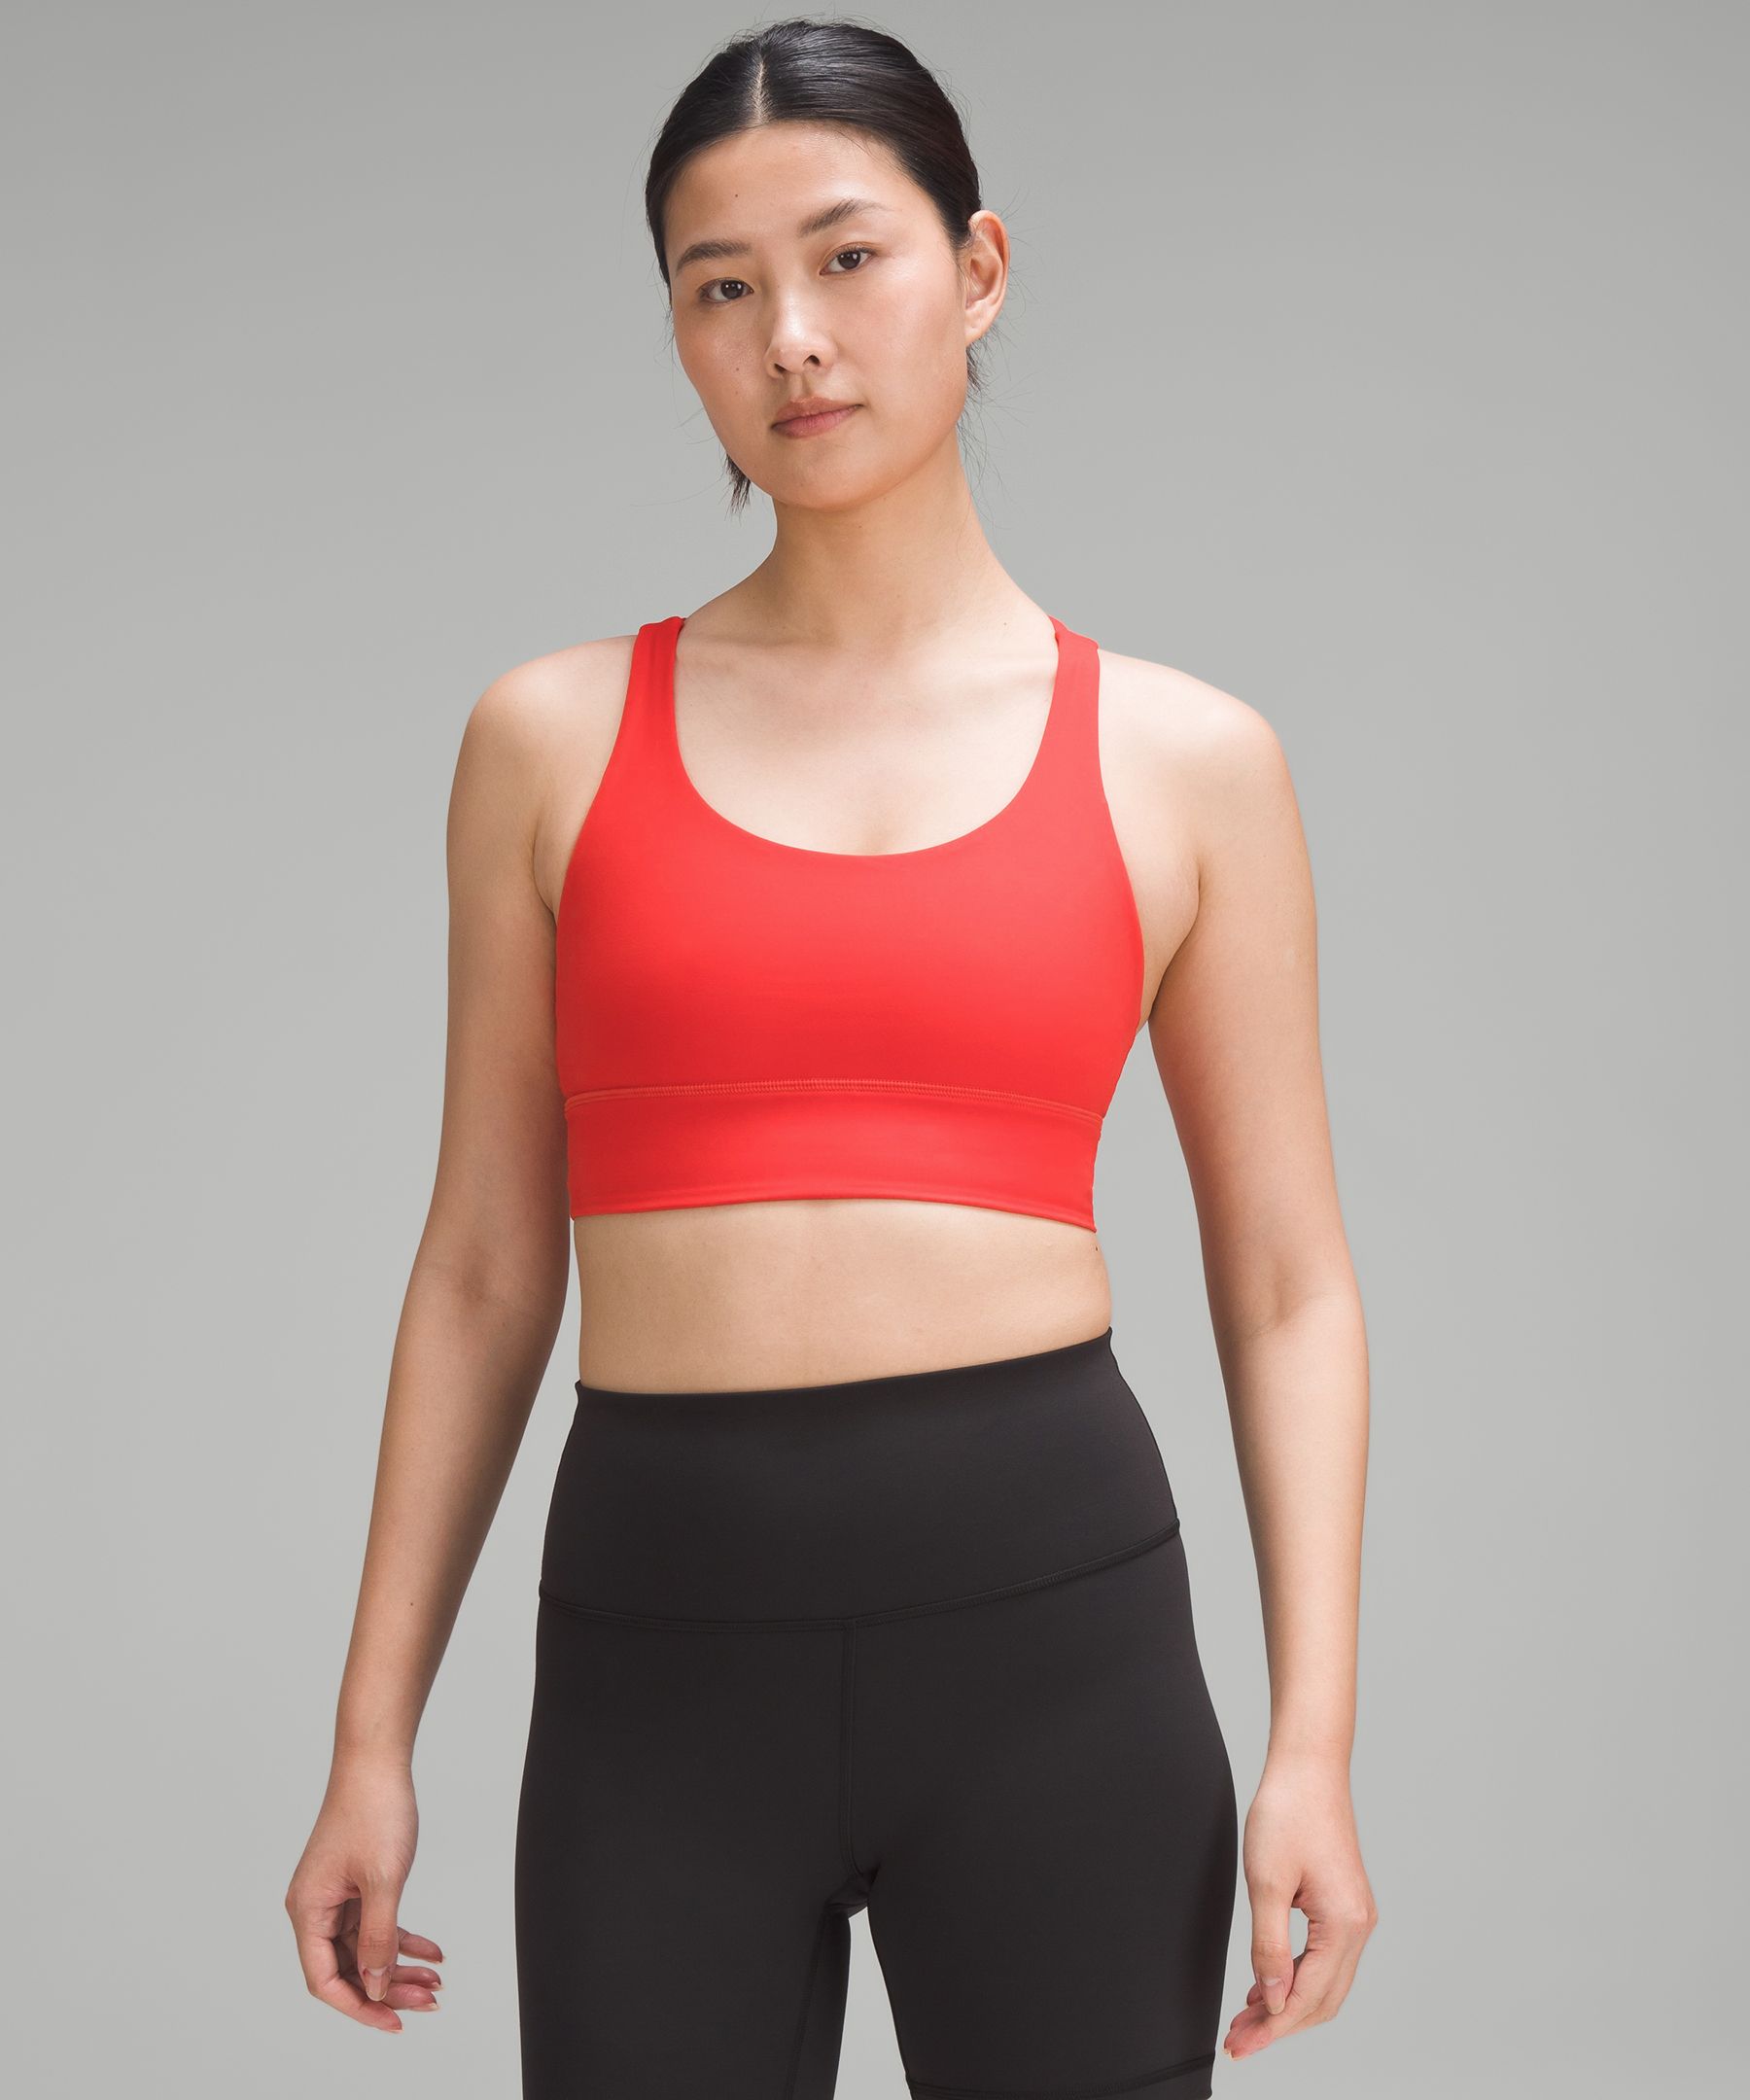 Pre-Owned Lululemon Athletica Womens Size 6 Sports Nepal